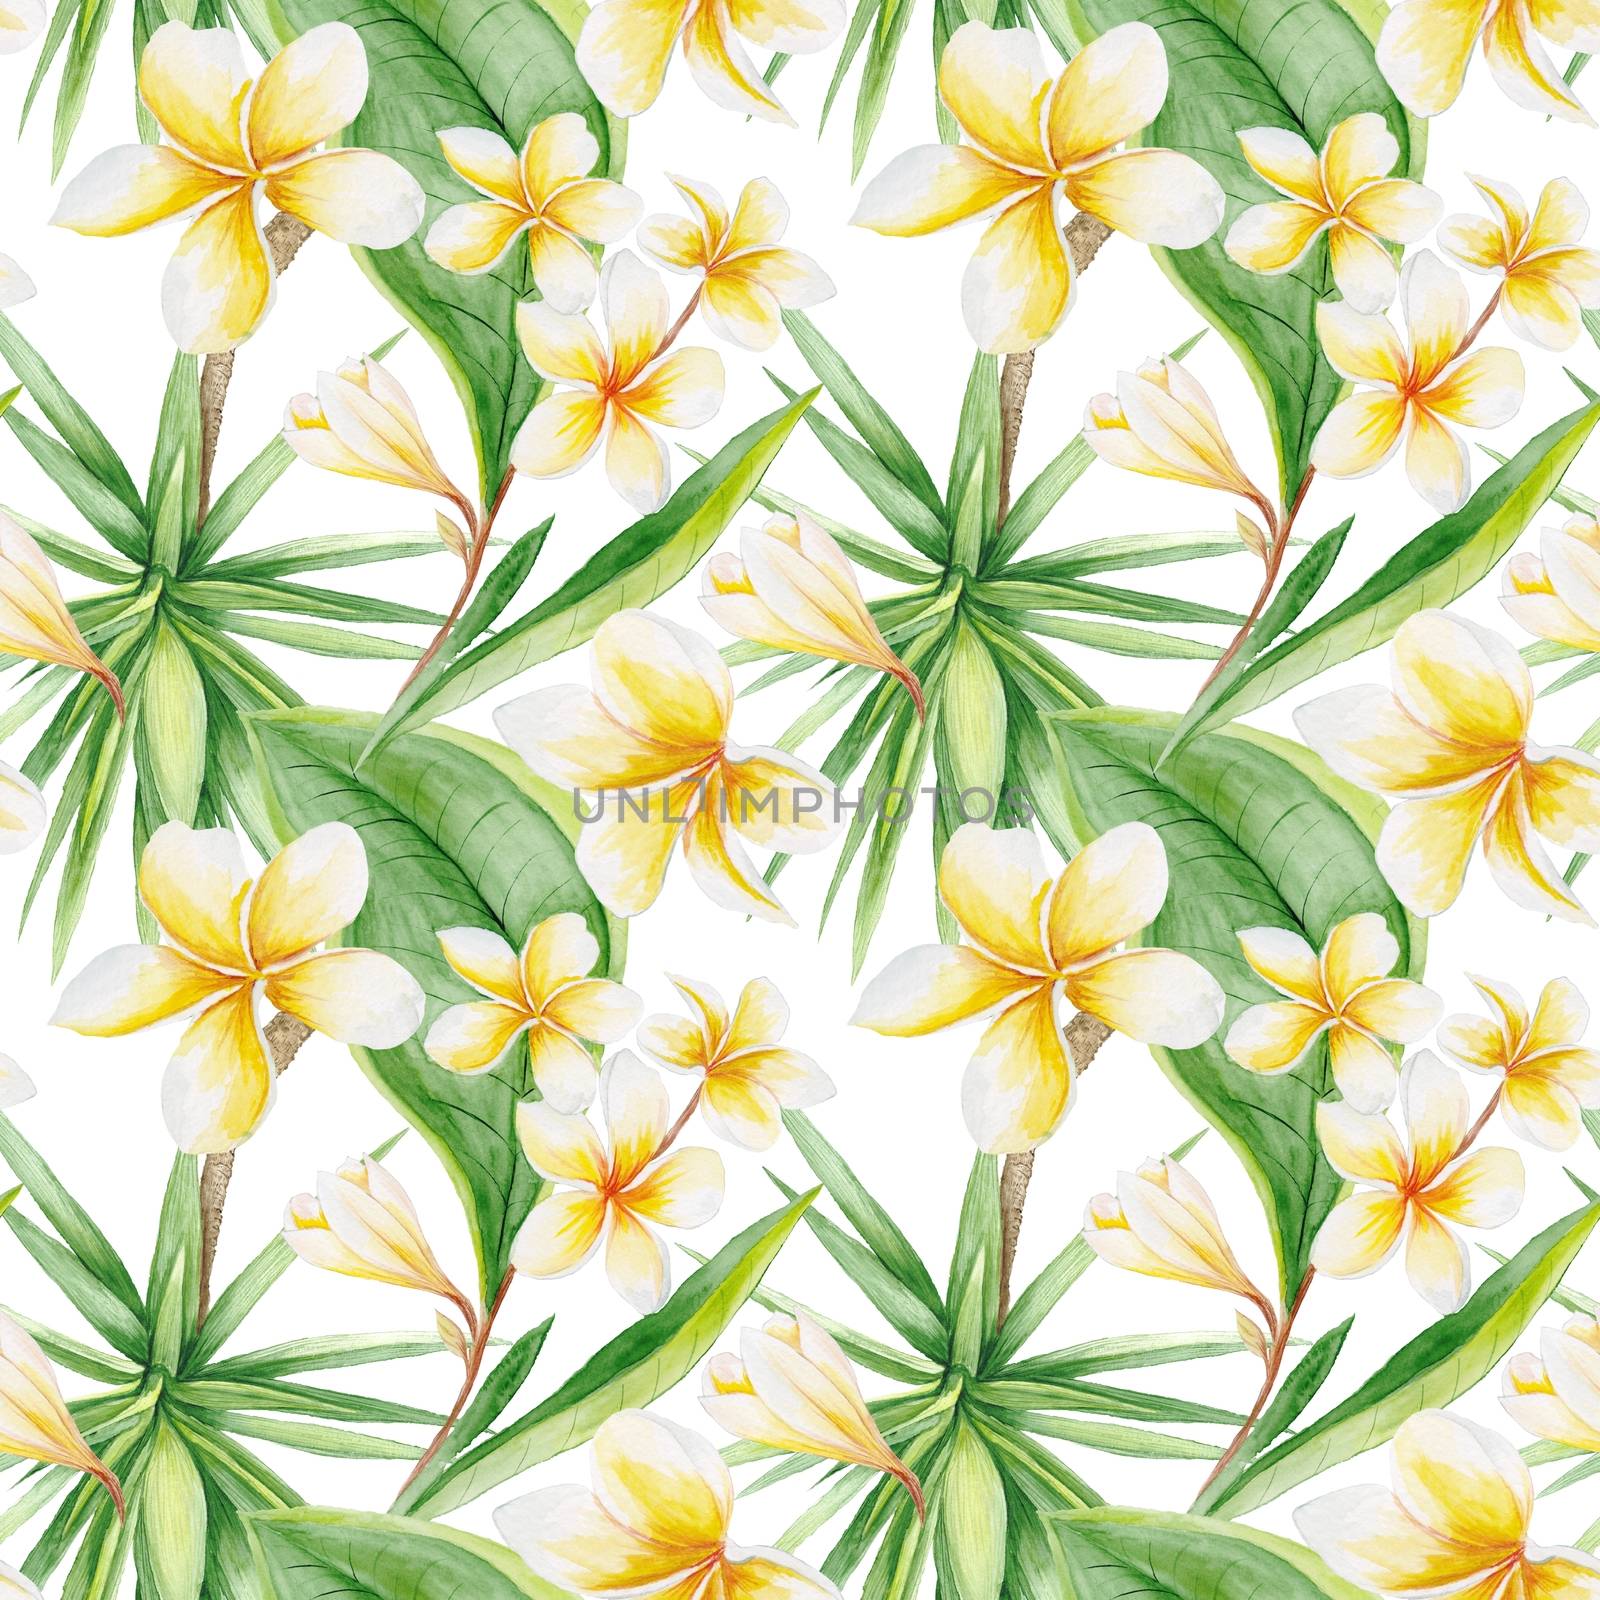 Hand-painted watercolor botanic illustration with plumeria flowers and yucca tree, seamless tile